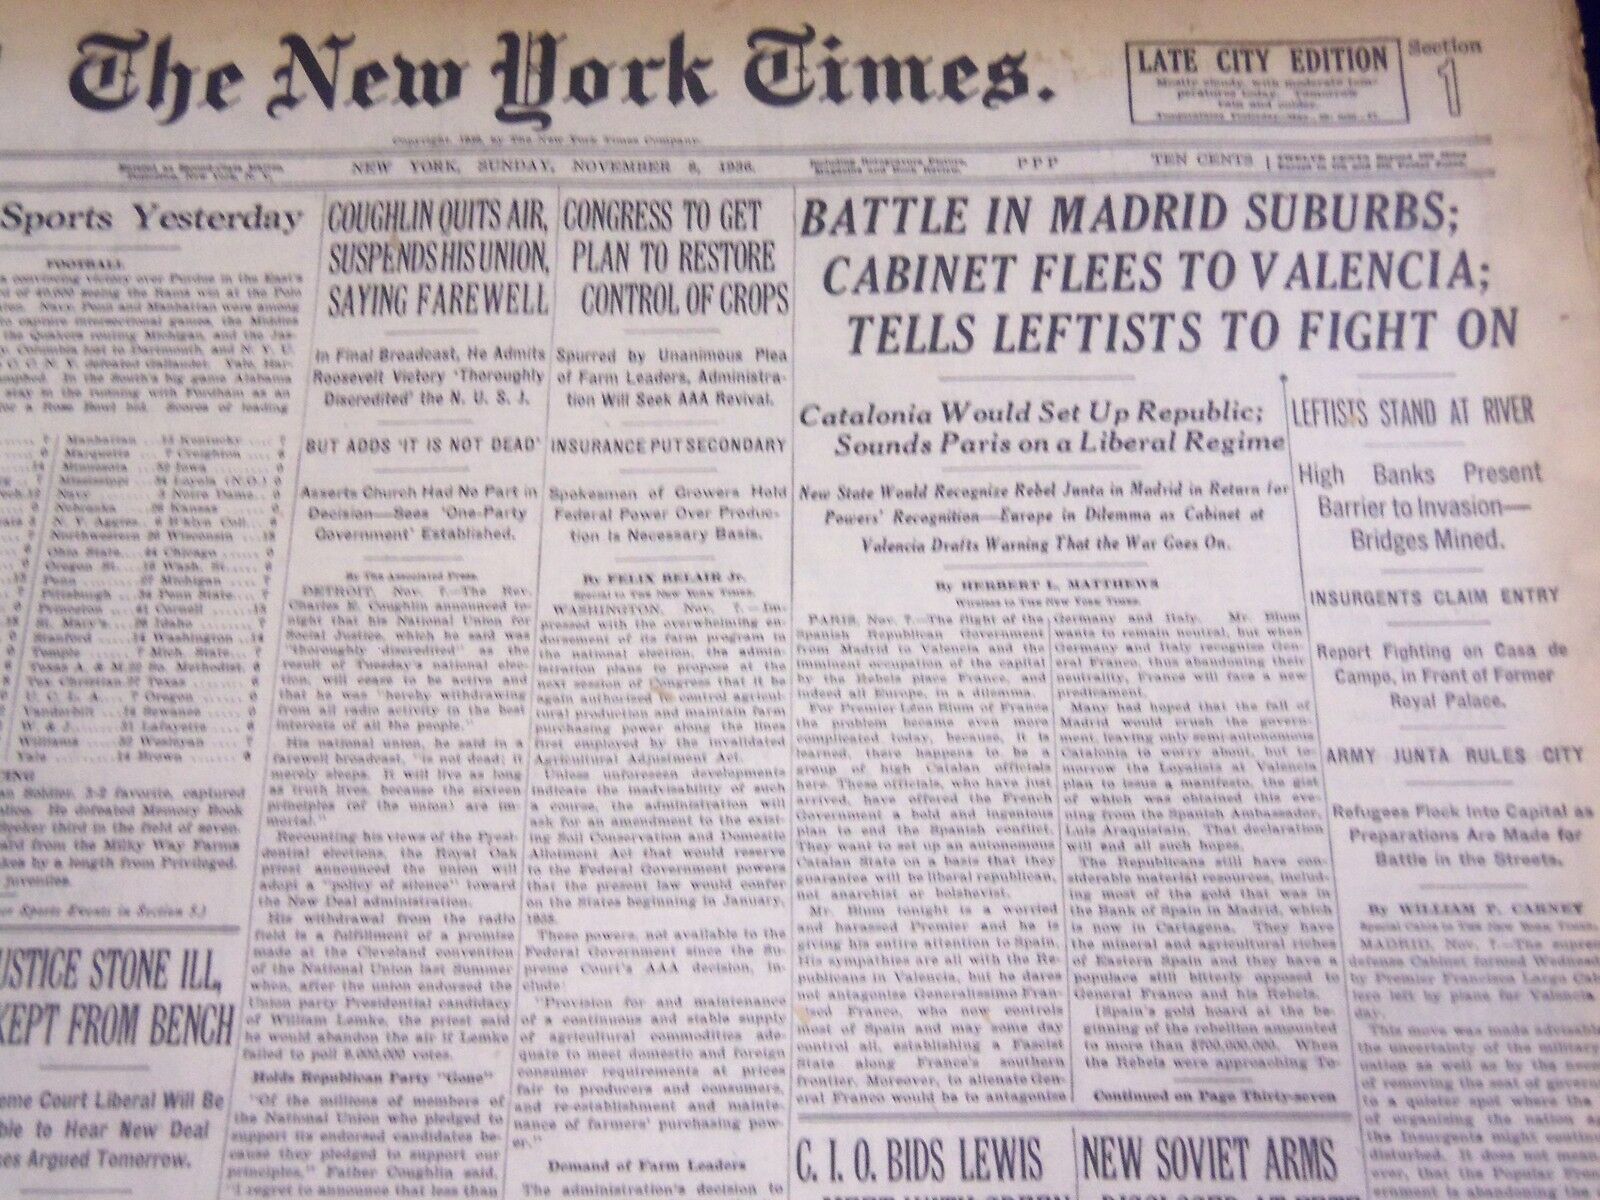 1936 NOV 8 NEW YORK TIMES - BATTLE IN MADRID SUBURBS LEFTISTS FIGHT ON - NT 1858